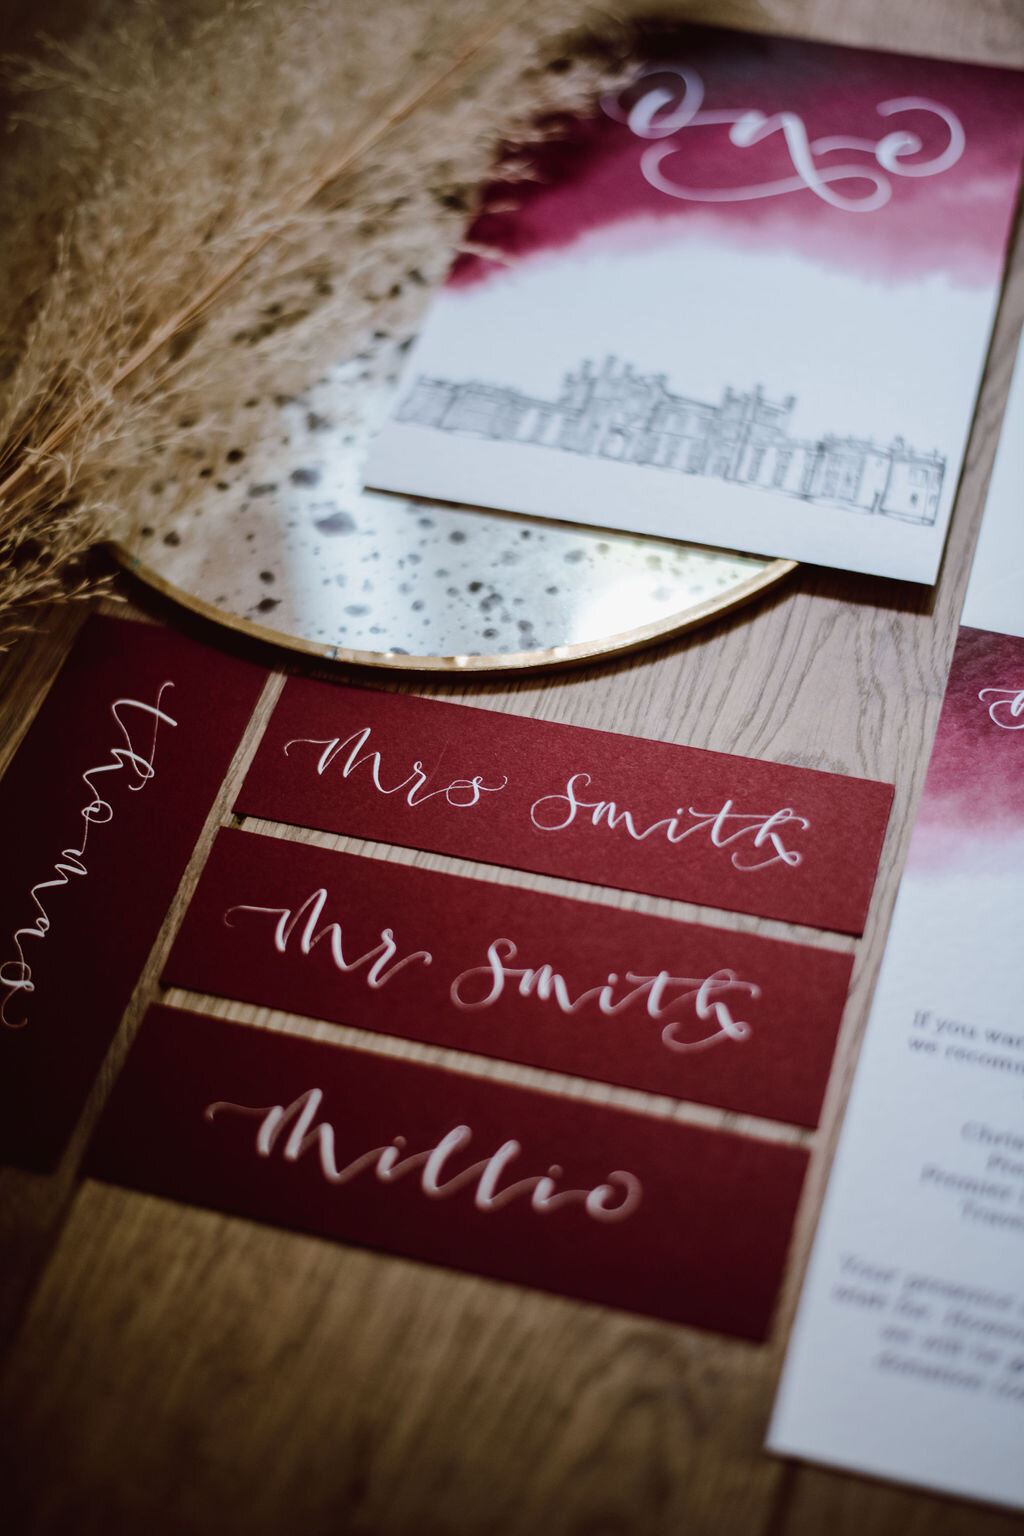 Burgundy place cards with white calligrahy - Place card by The Amyverse.jpg